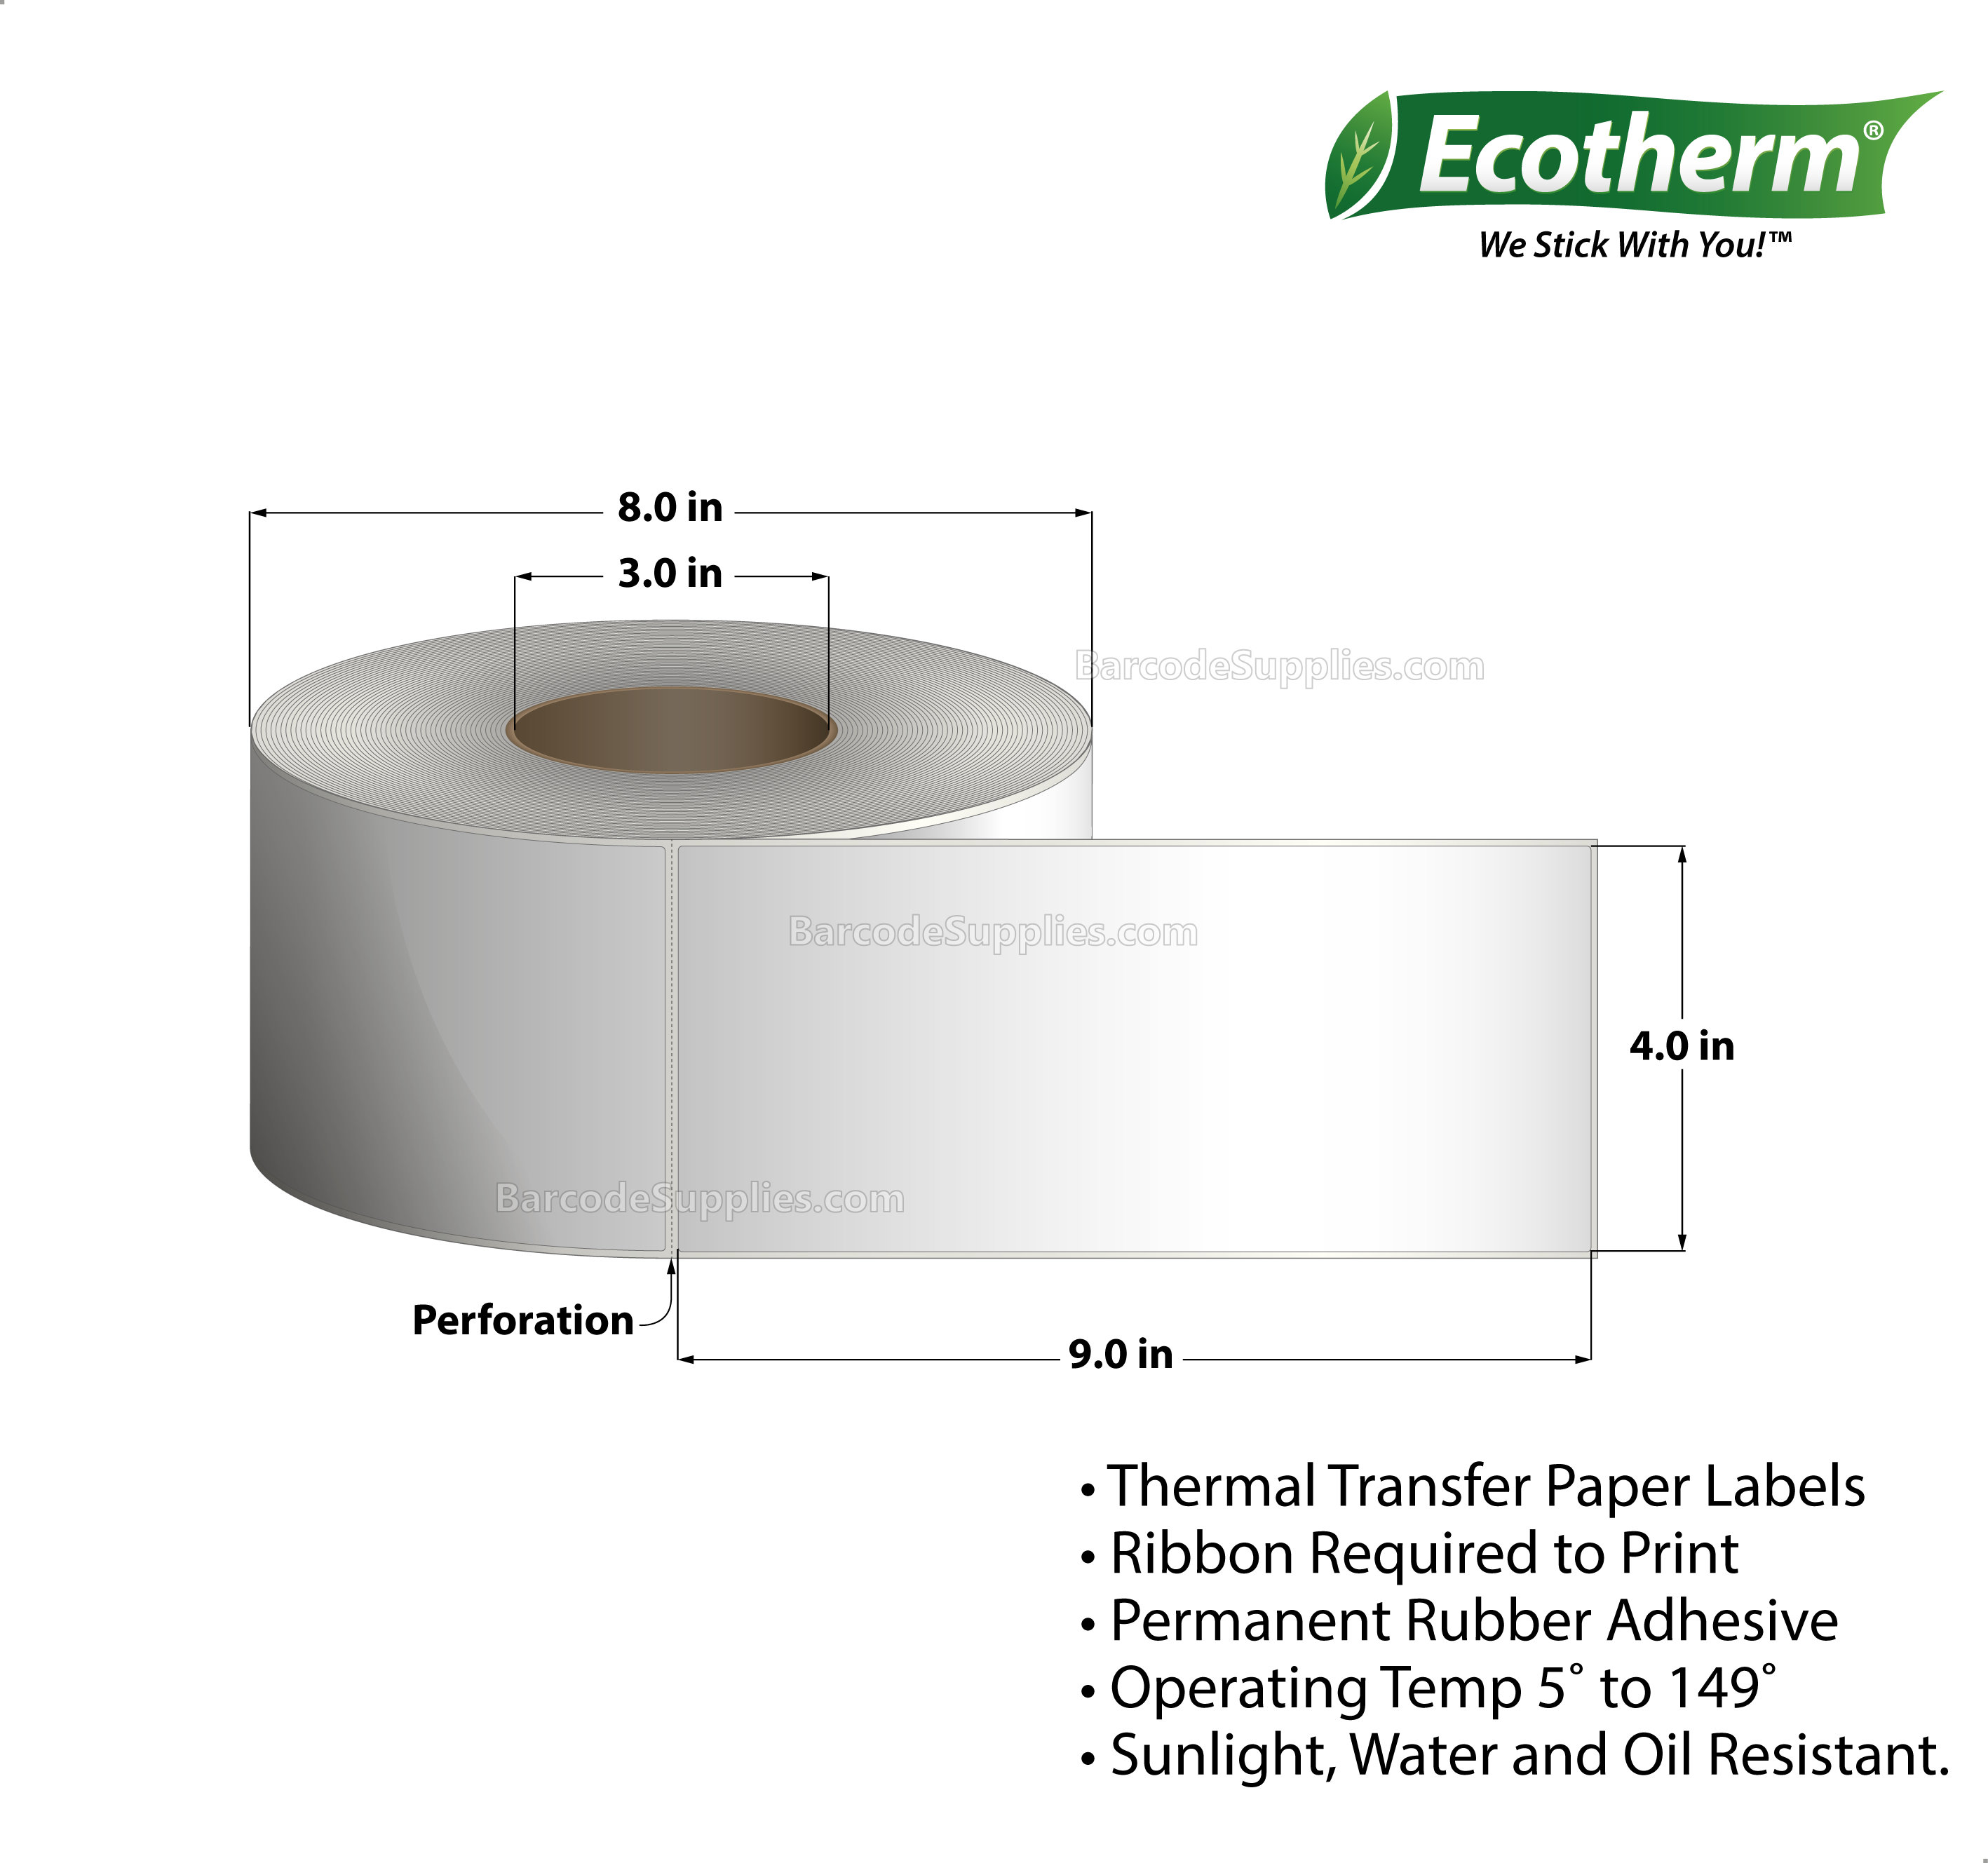 4 x 9 Thermal Transfer White Labels With Rubber Adhesive - Perforated - 750 Labels Per Roll - Carton Of 4 Rolls - 3000 Labels Total - MPN: ECOTHERM28149-4